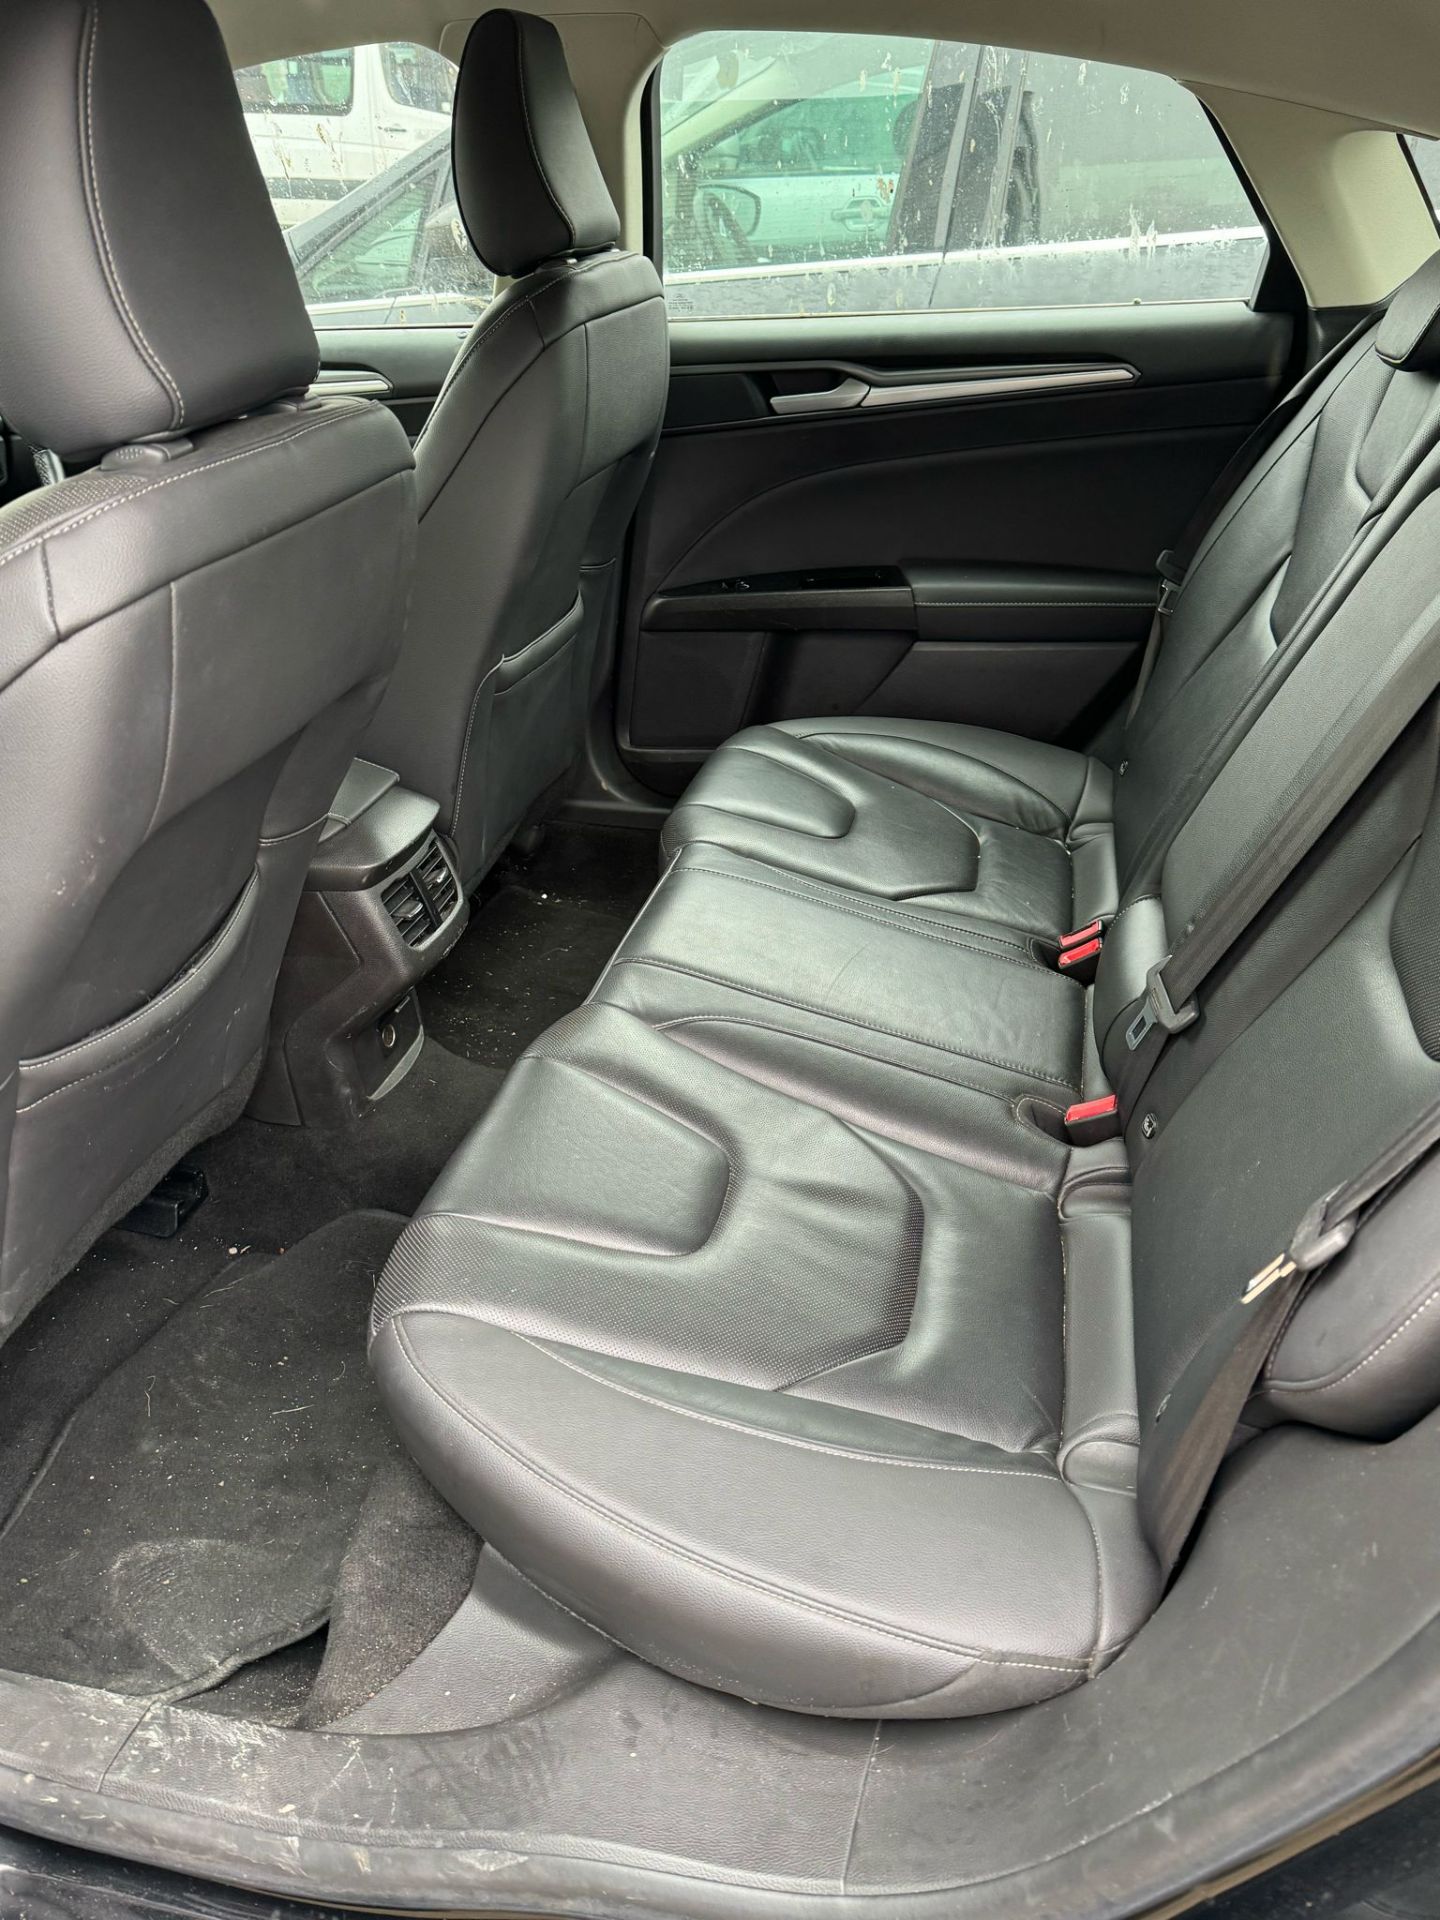 NO RESERVE - 2019, FORD Mondeo (Ex-Fleet Vehicle) - Image 16 of 19